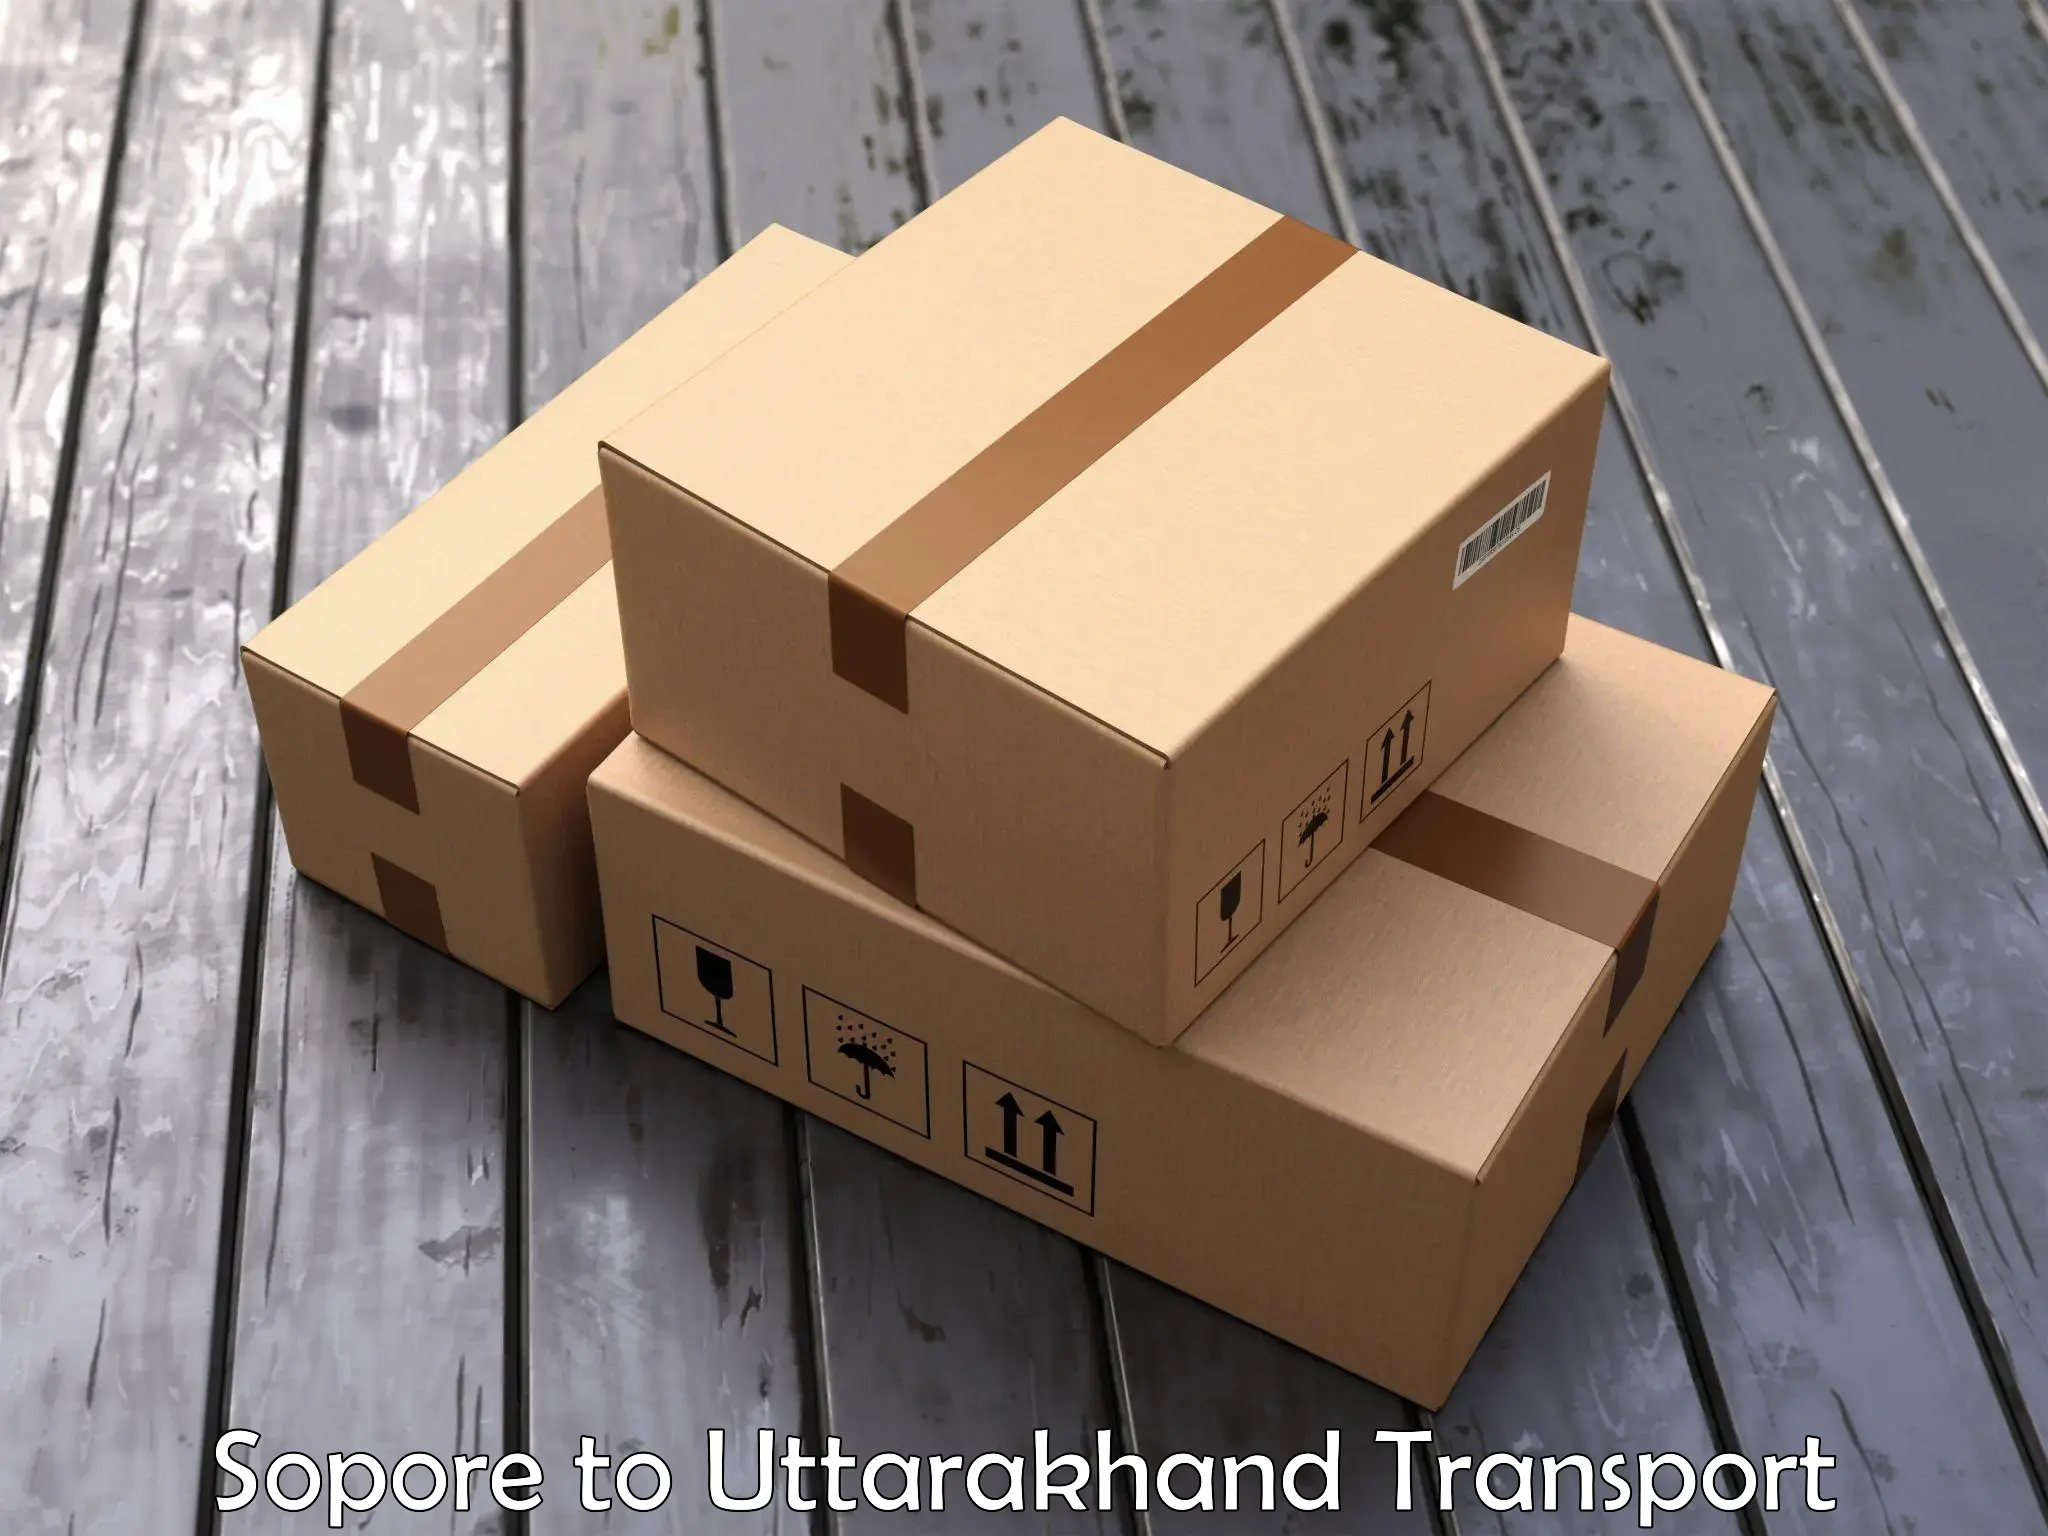 Goods delivery service Sopore to Uttarakhand